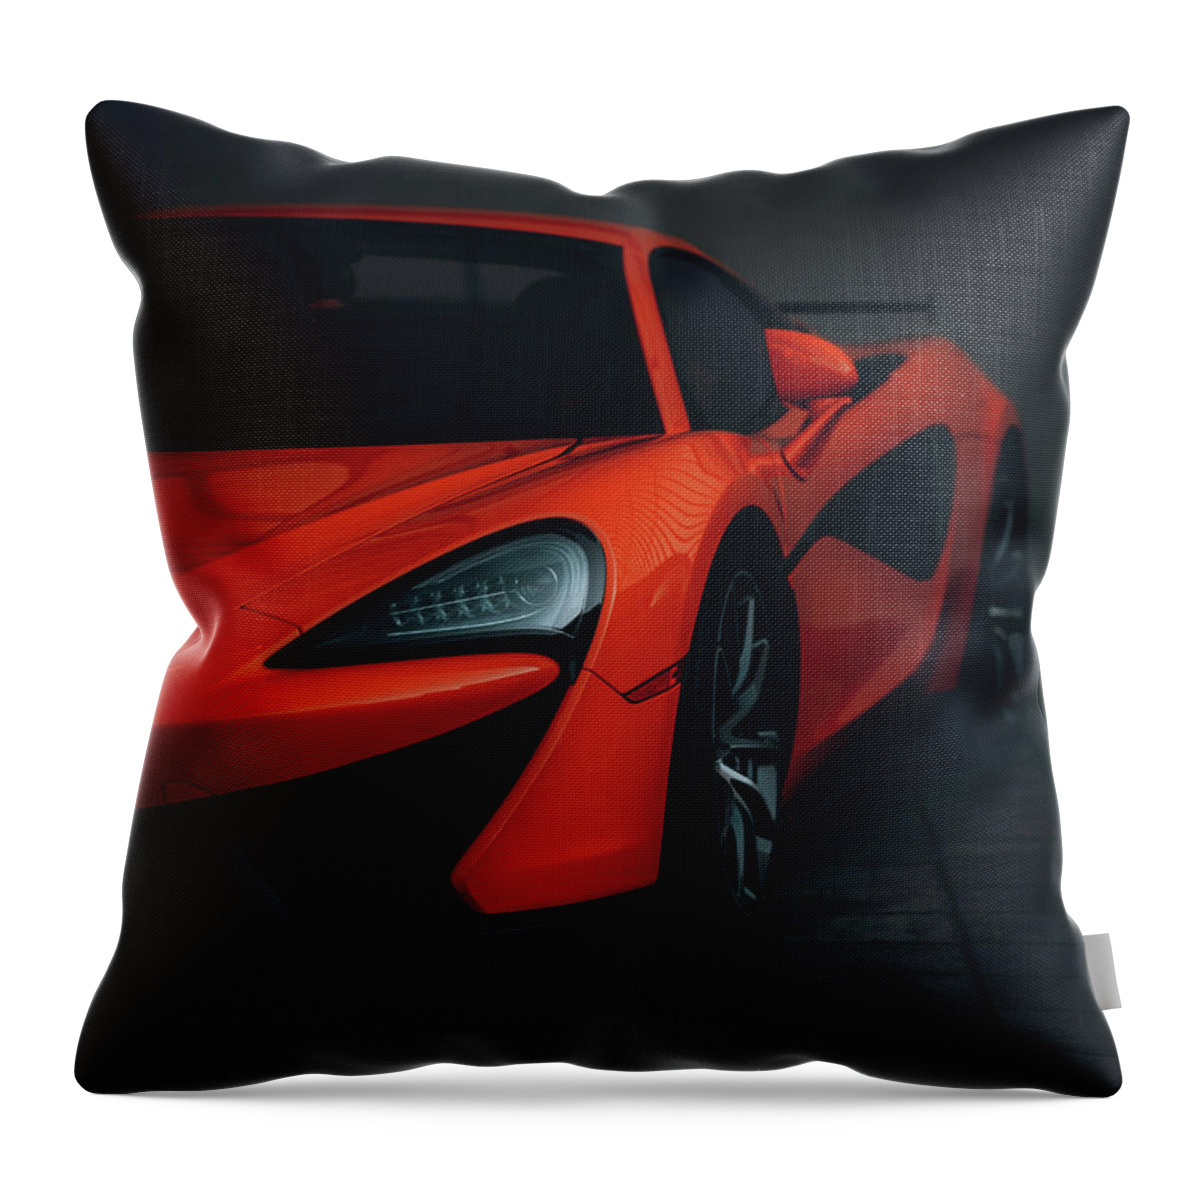  Throw Pillow featuring the photograph Spyder by William Boggs